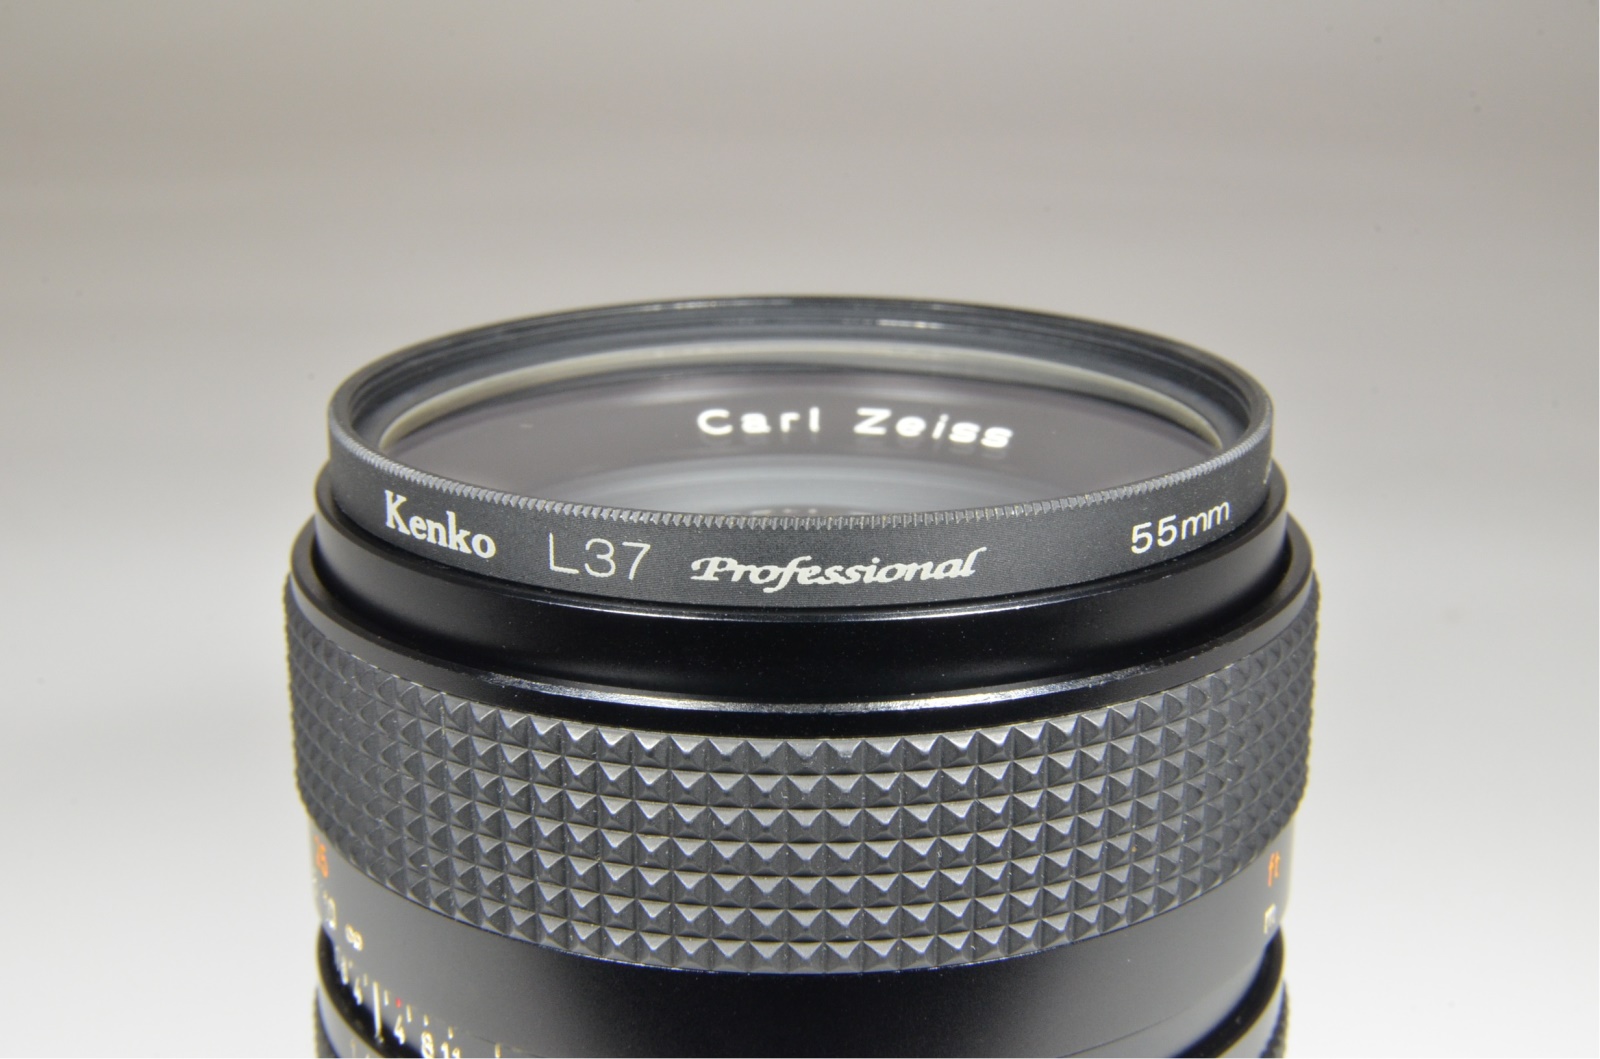 Carl Zeiss ◉ EXC 4◉ CONTAX CARLZEISS PLANAR T 50MM F/1.4 LENS MMJ FROM JAPAN 